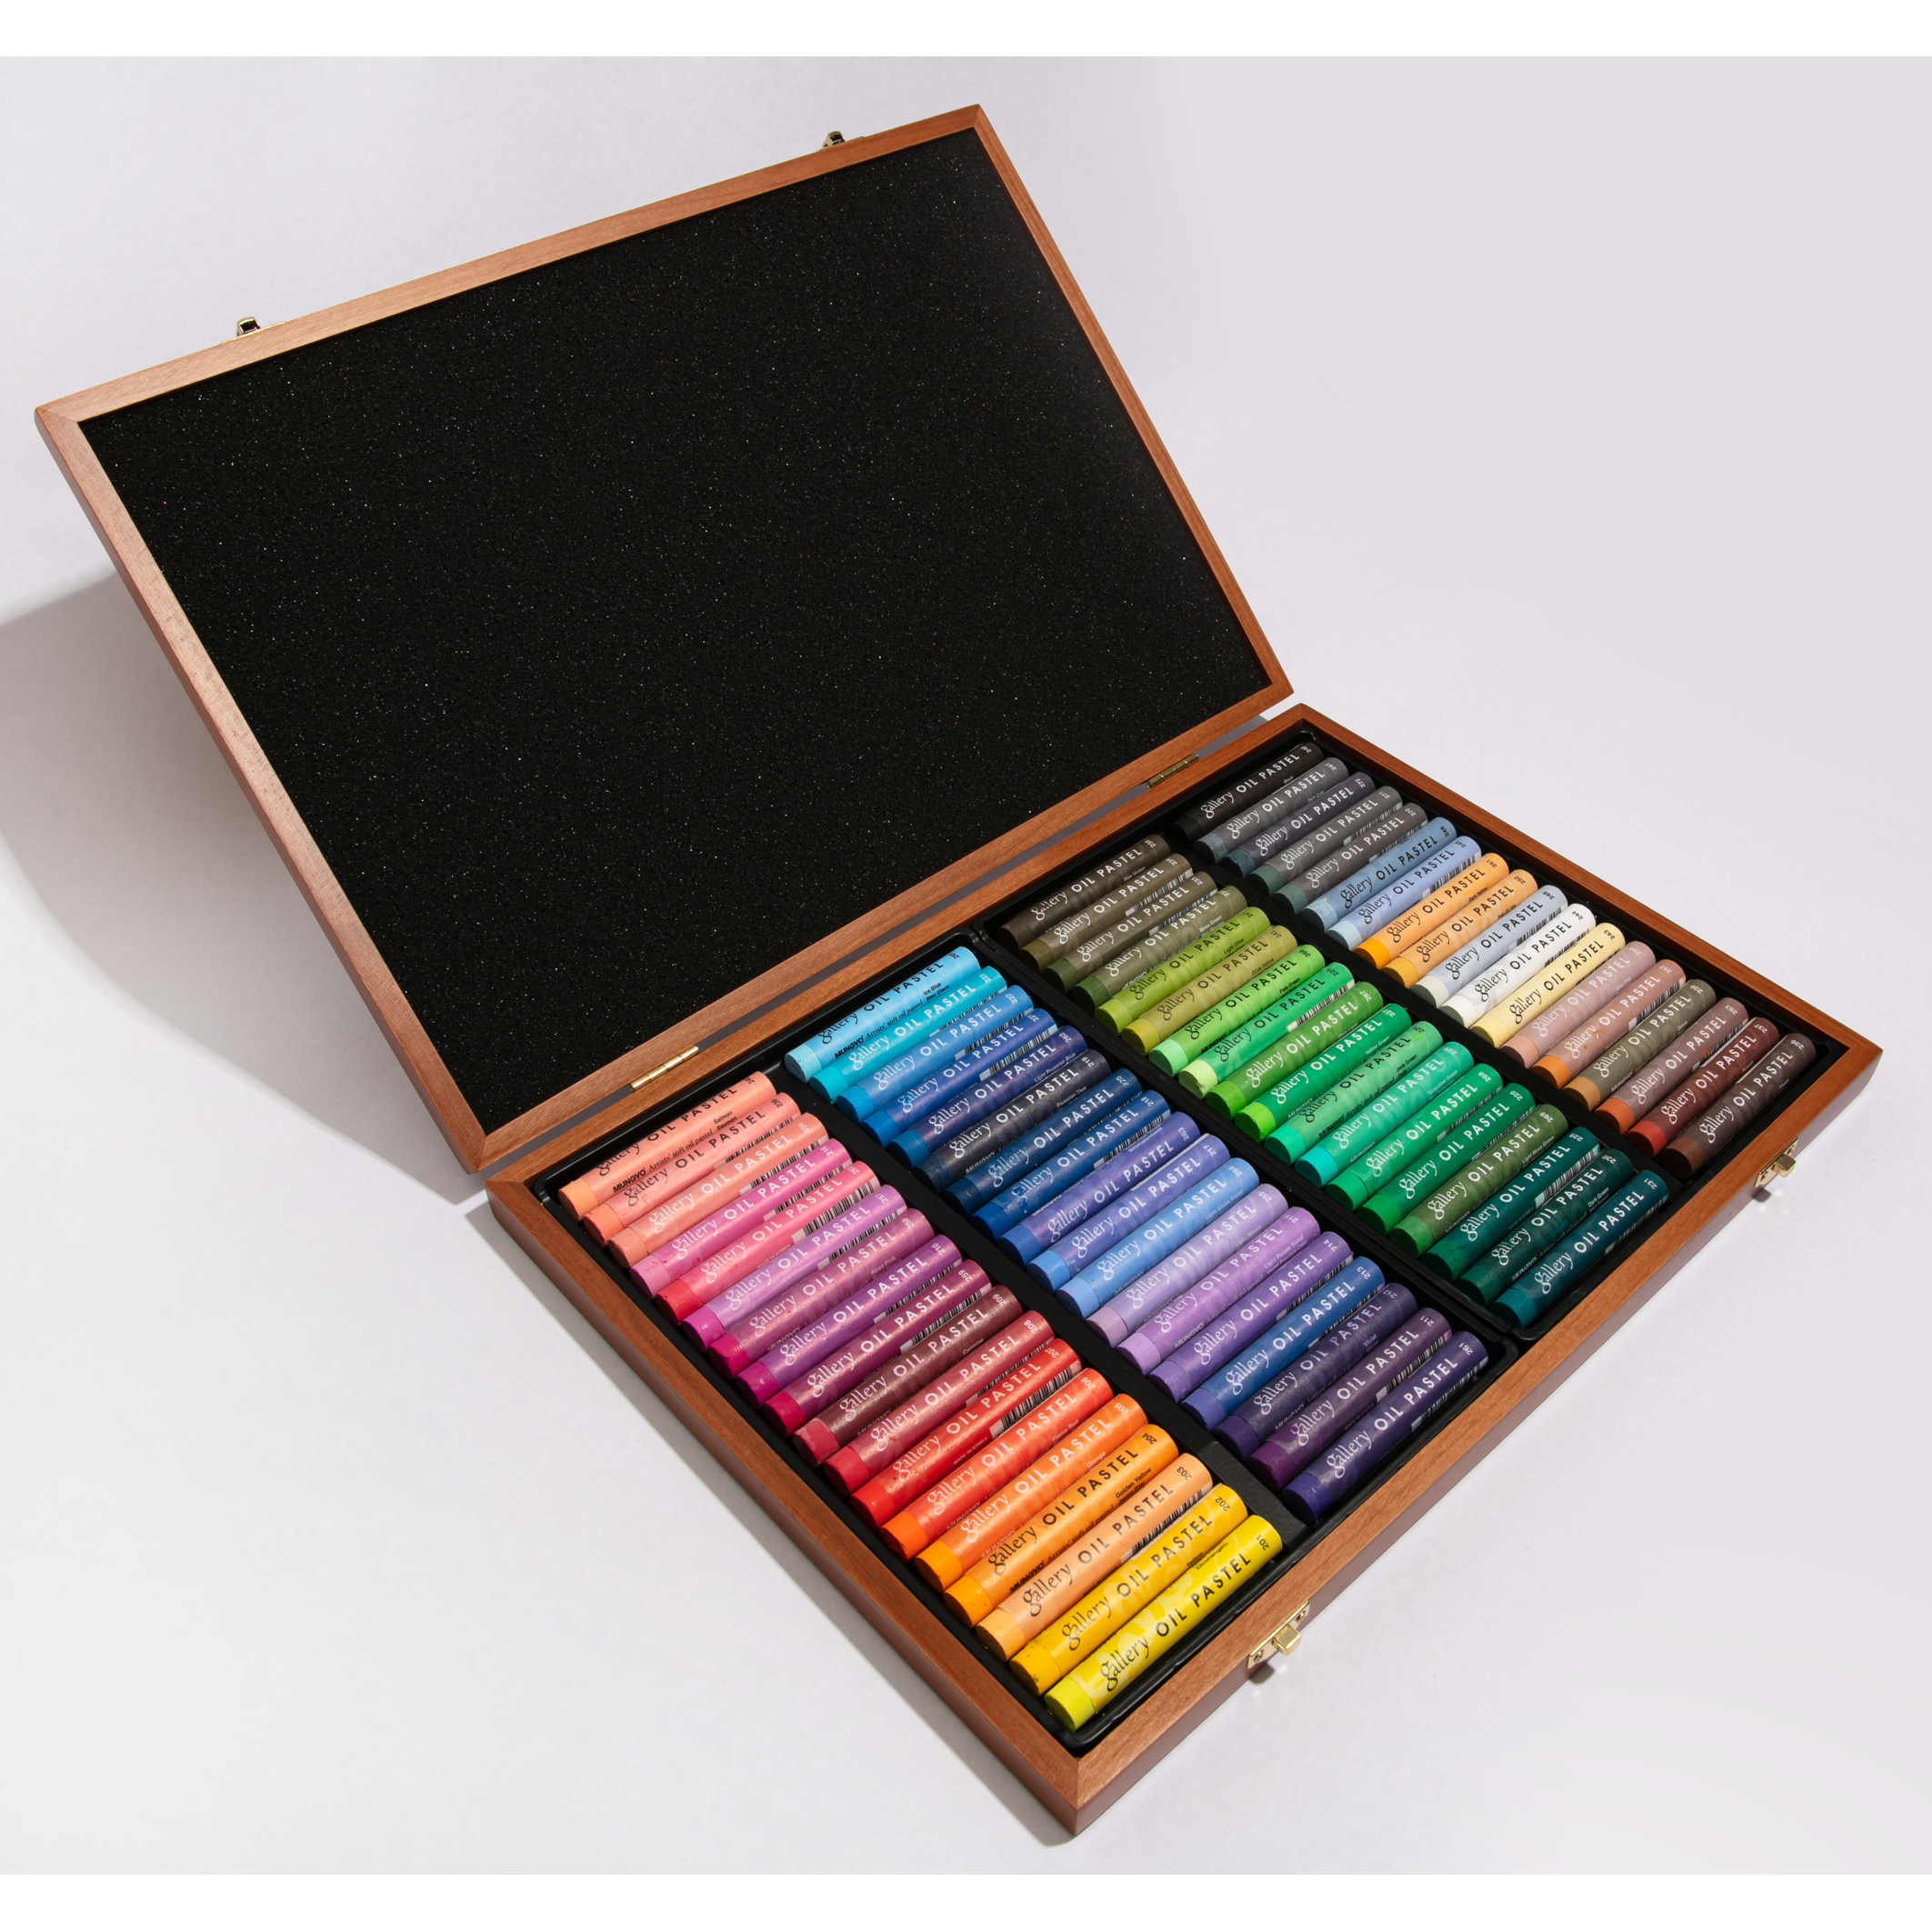 Open Mungyo Gallery Soft Oil Pastels 36 set Unboxing Review 